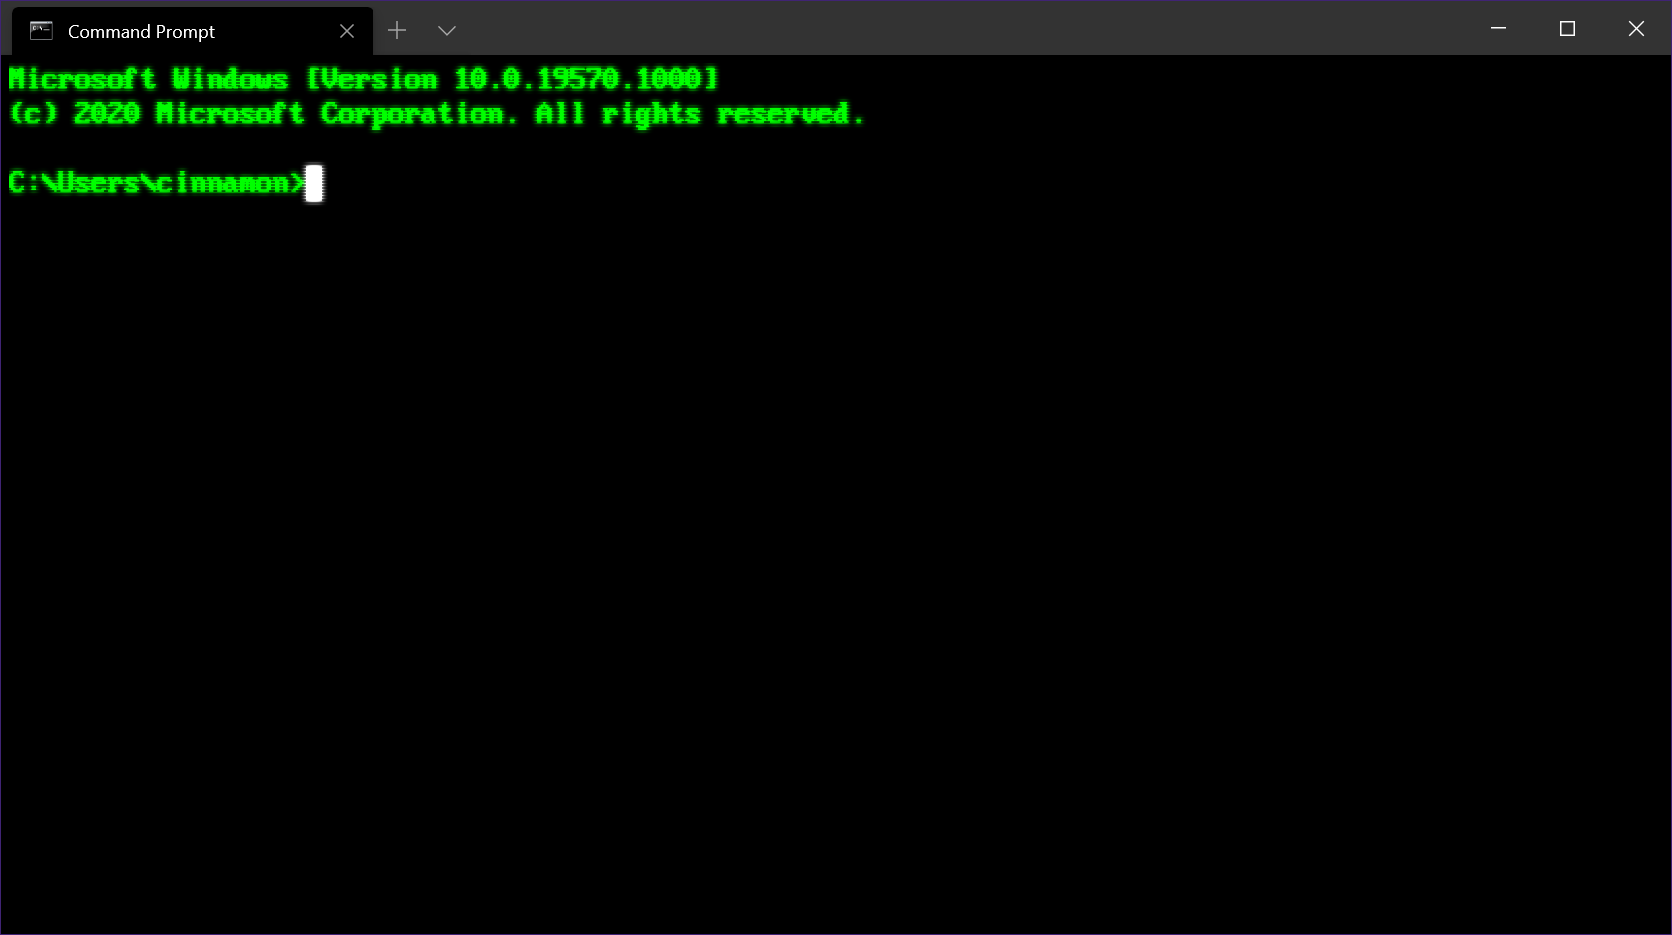 Terminal or command prompt